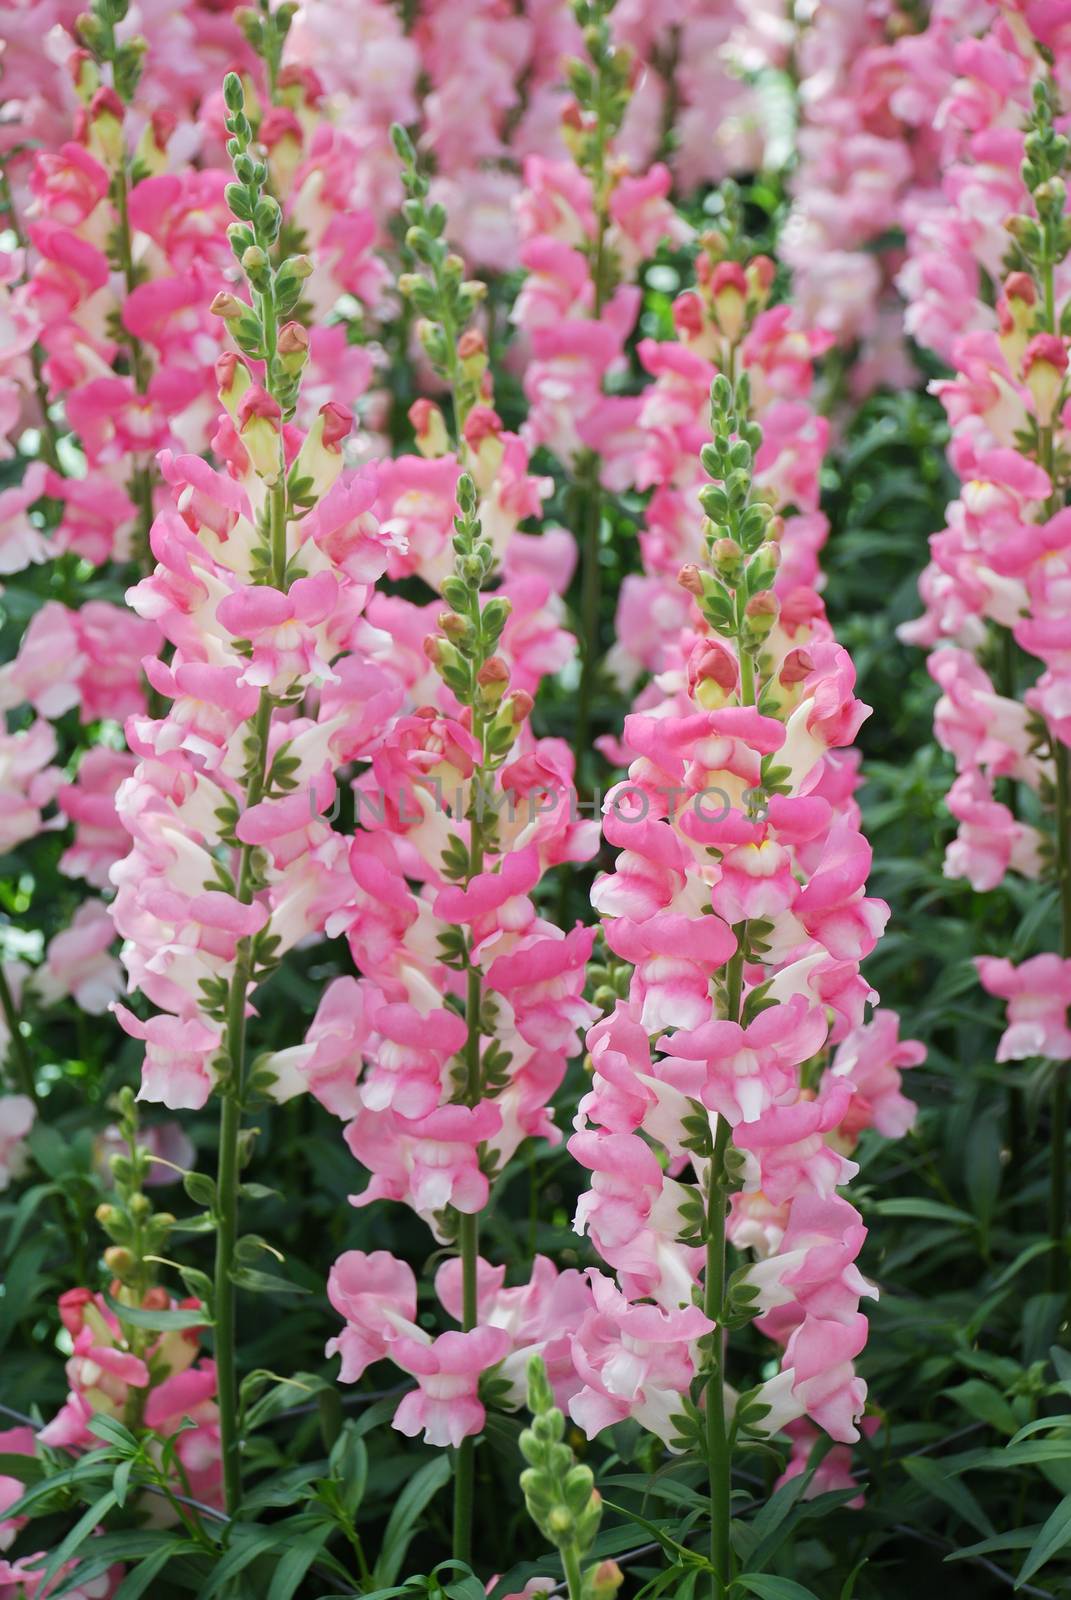 colorful Snap dragon (Antirrhinum majus) blooming in garden back by yuiyuize